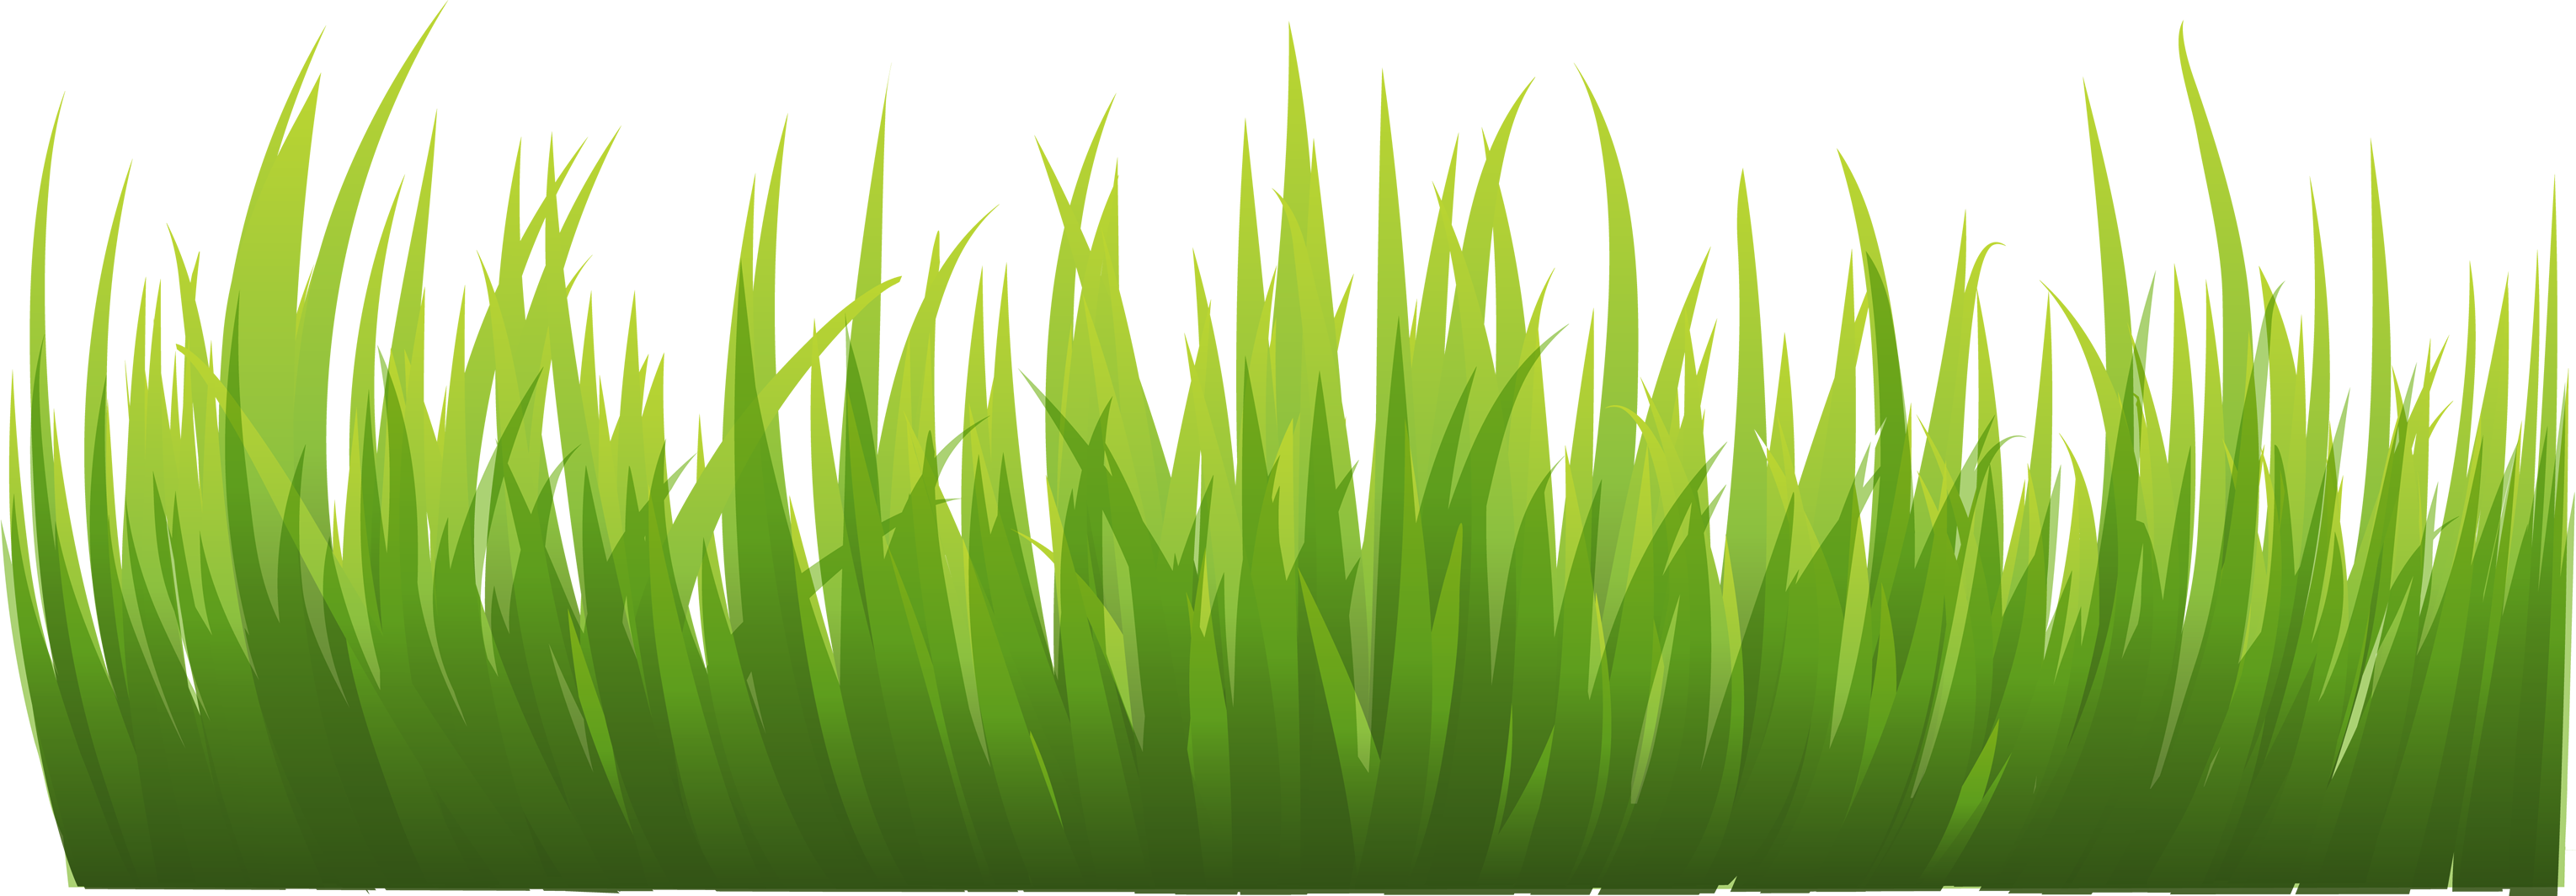 Free Grass Png Transparent Download Free Grass Png Transparent Png Images Free Cliparts On Clipart Library